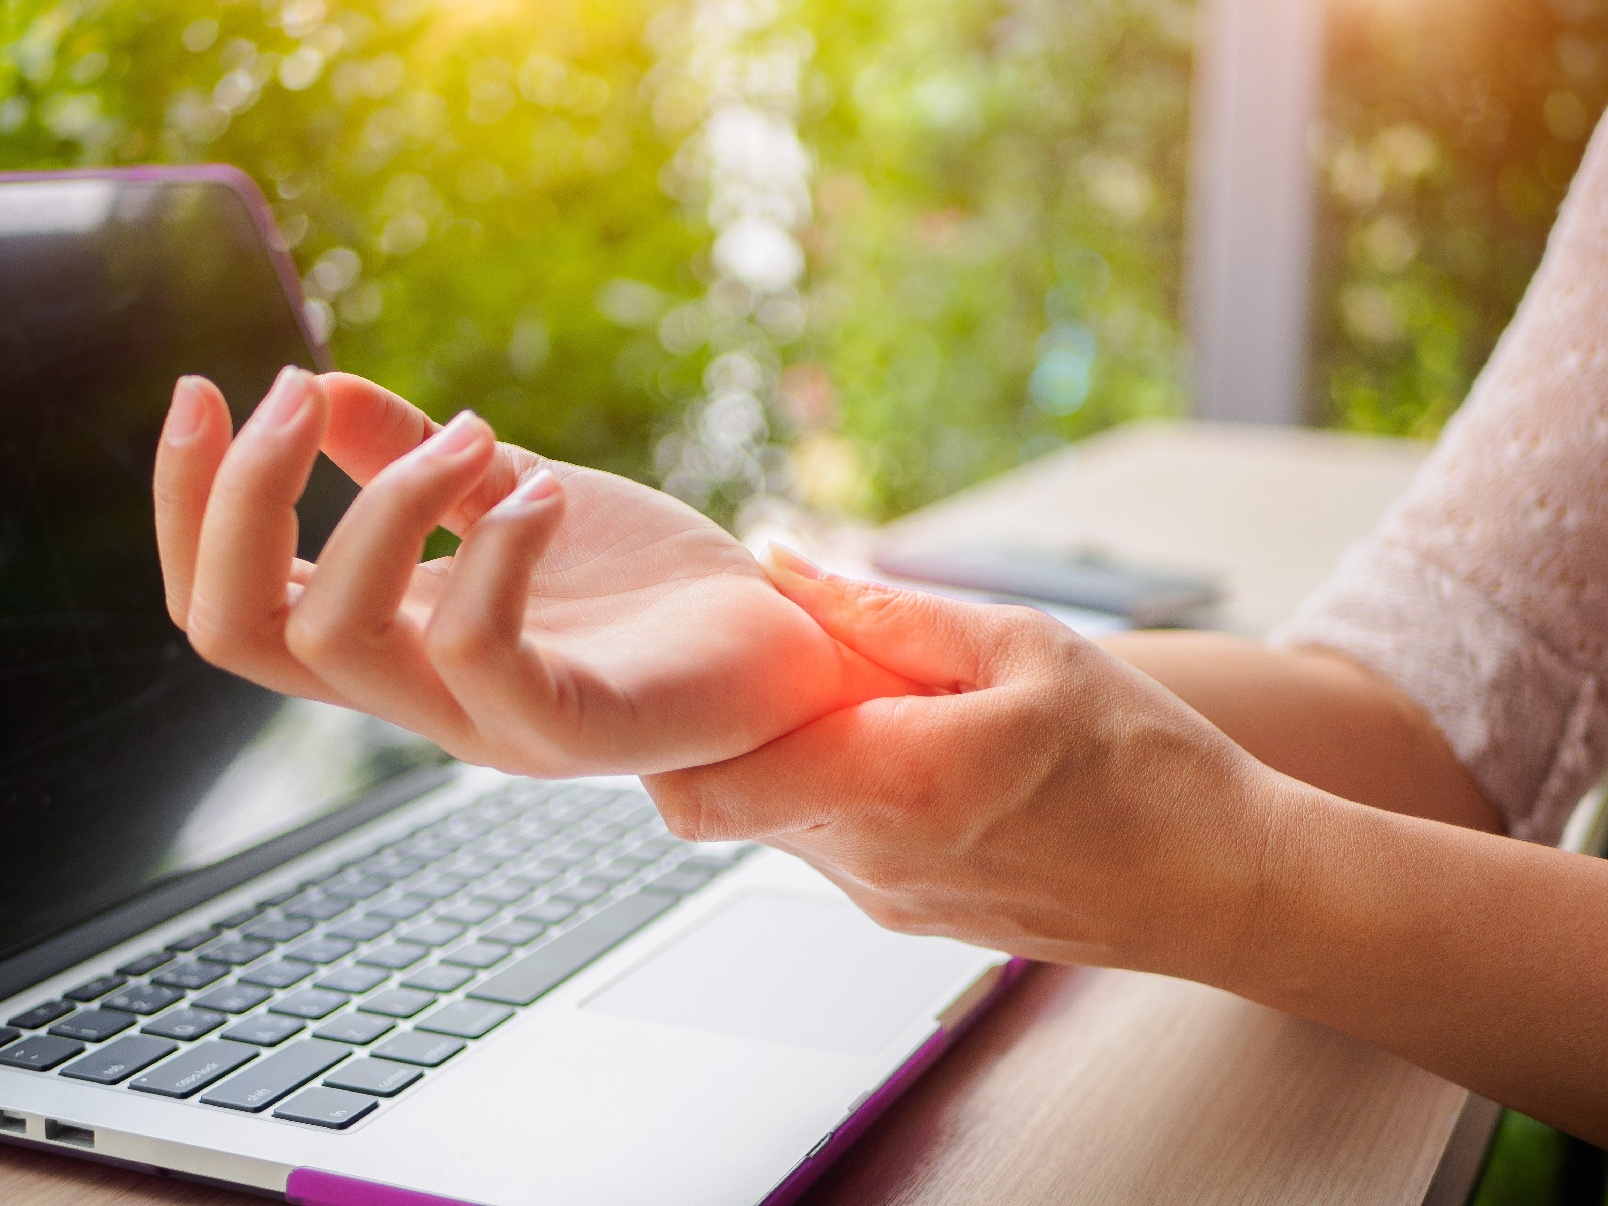 What is Carpal Tunnel Syndrome and How Is It Treated?